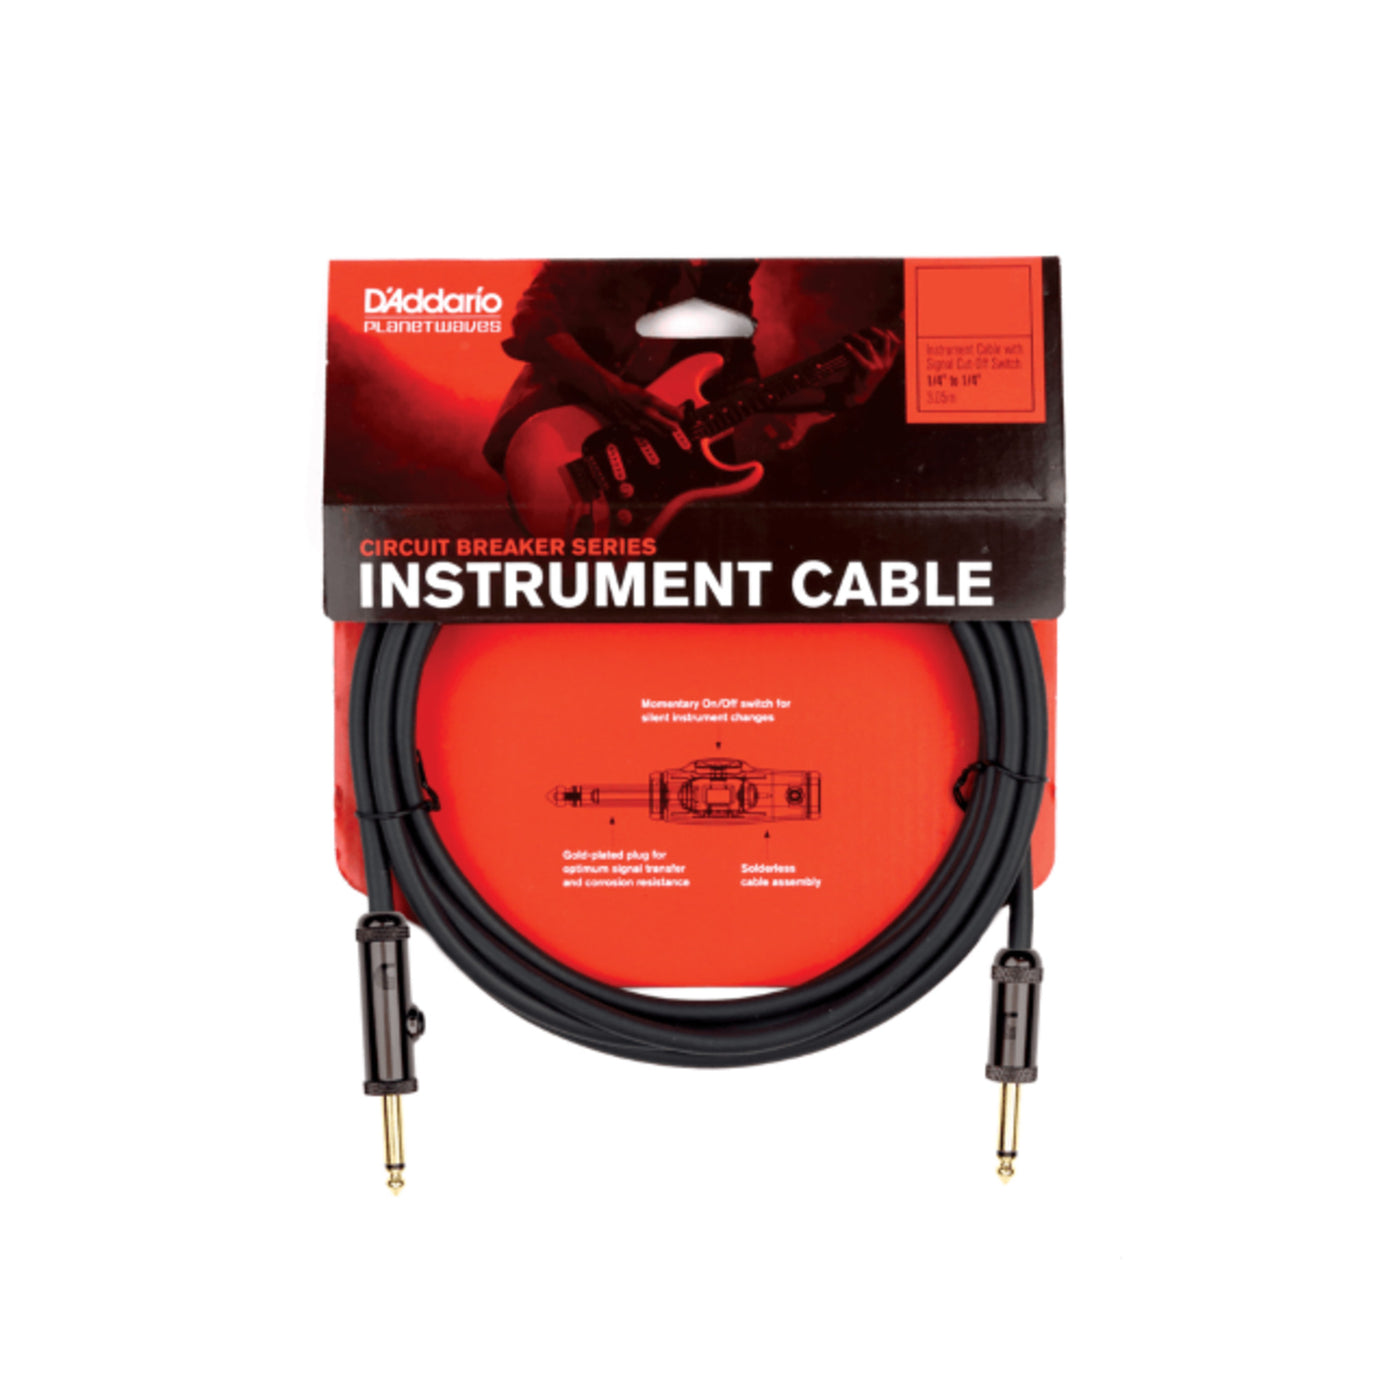 D'Addario Circuit Breaker Momentary Mute Instrument Cable, 10 Feet (PW-AG-10)